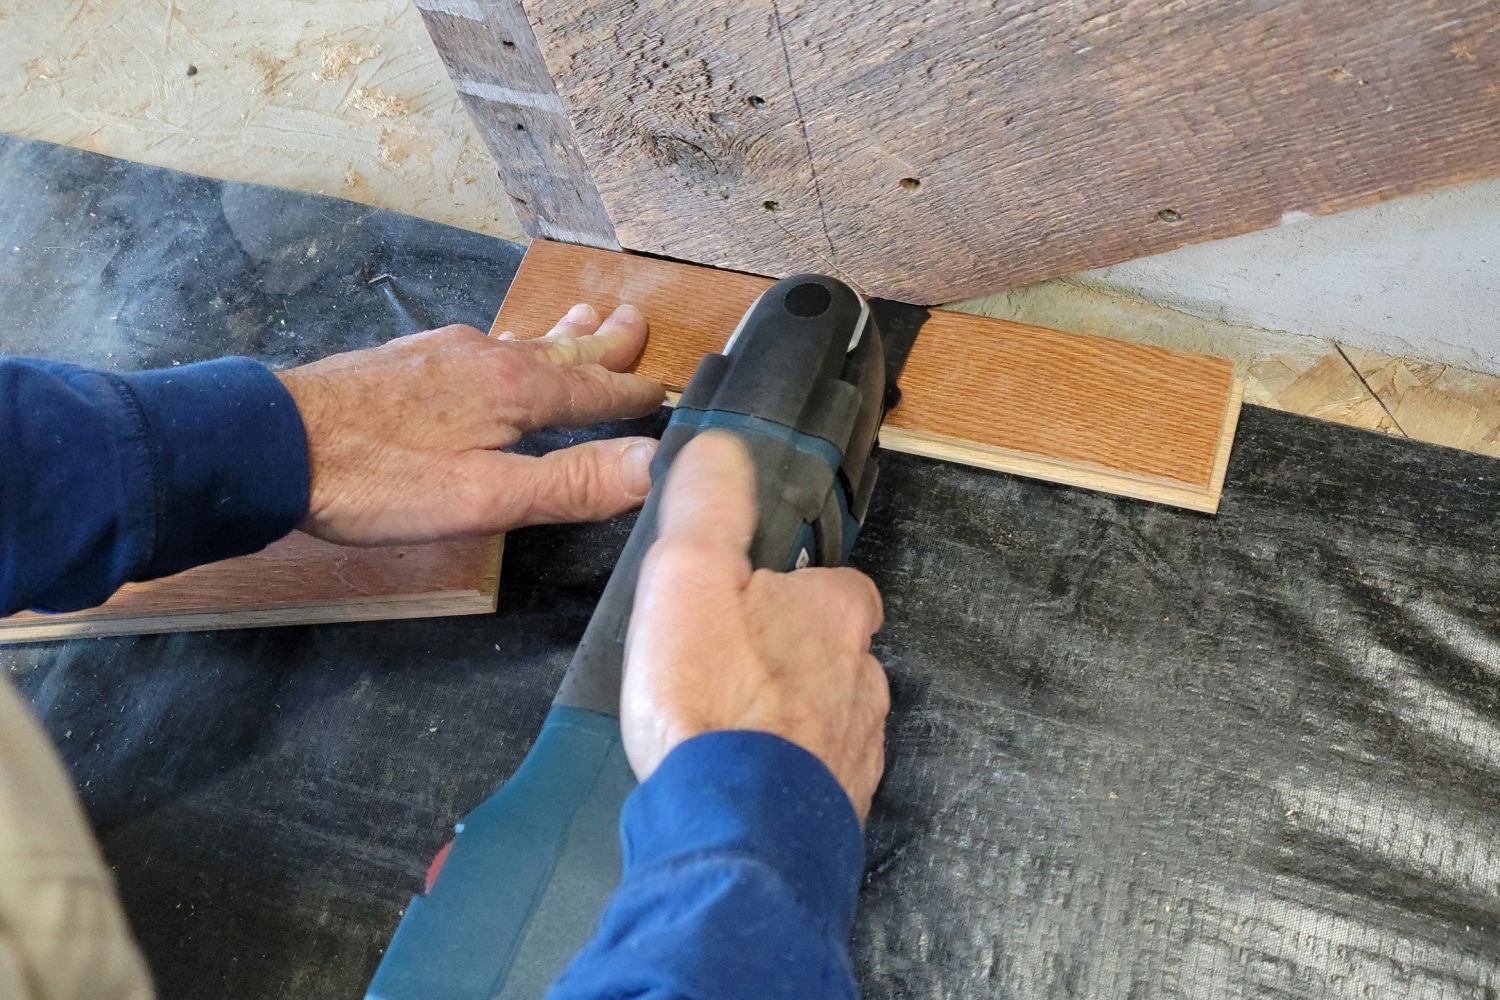 The Bosch Oscillating Tool Review